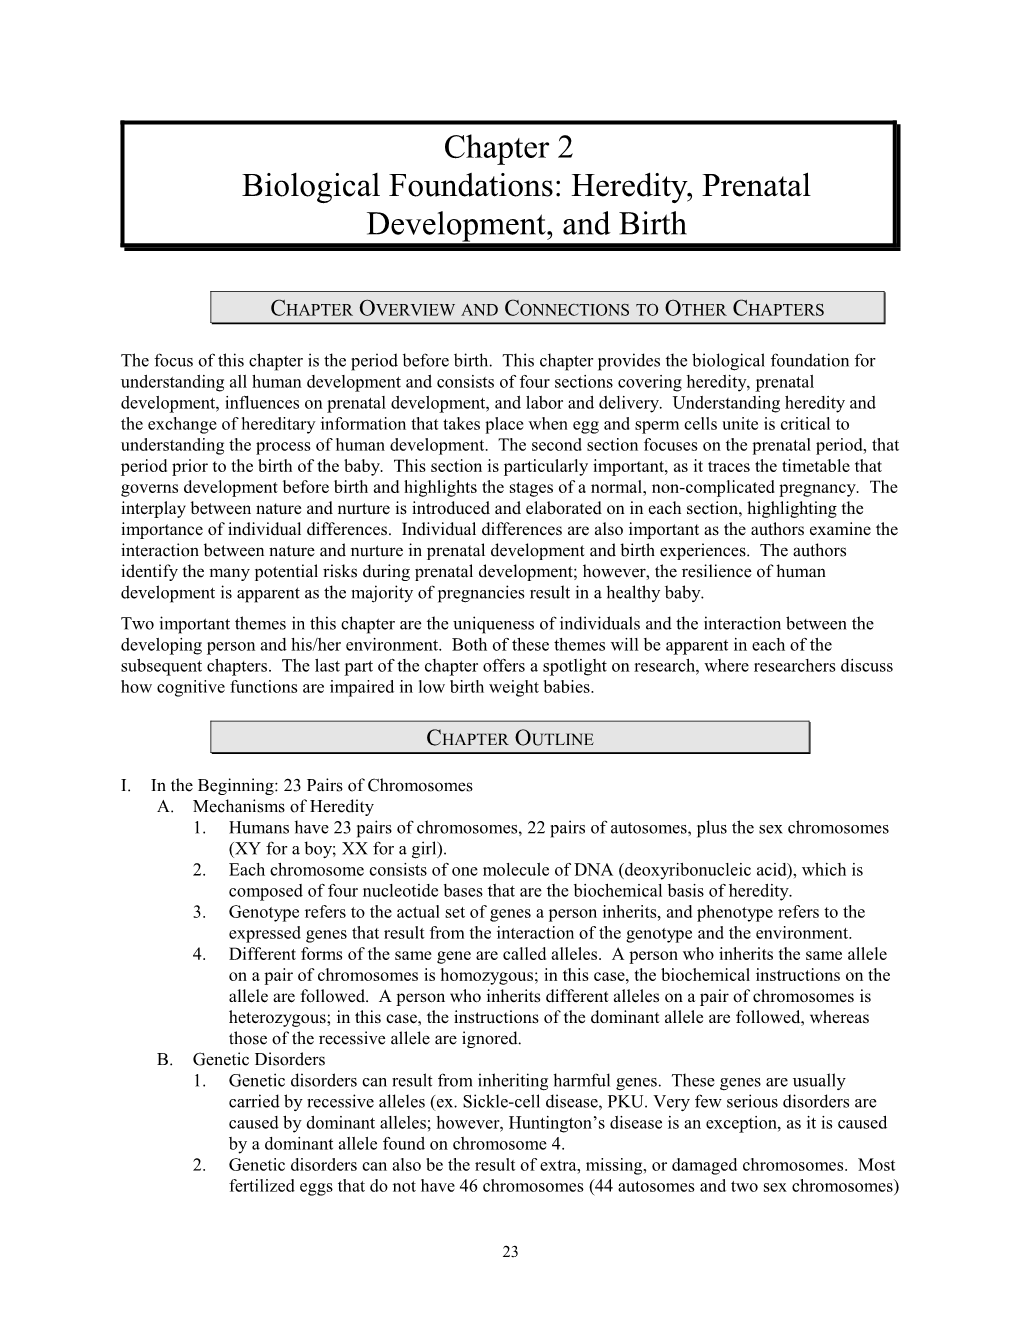 Chapter 2Biological Foundations: Heredity, Prenatal Development, and Birth